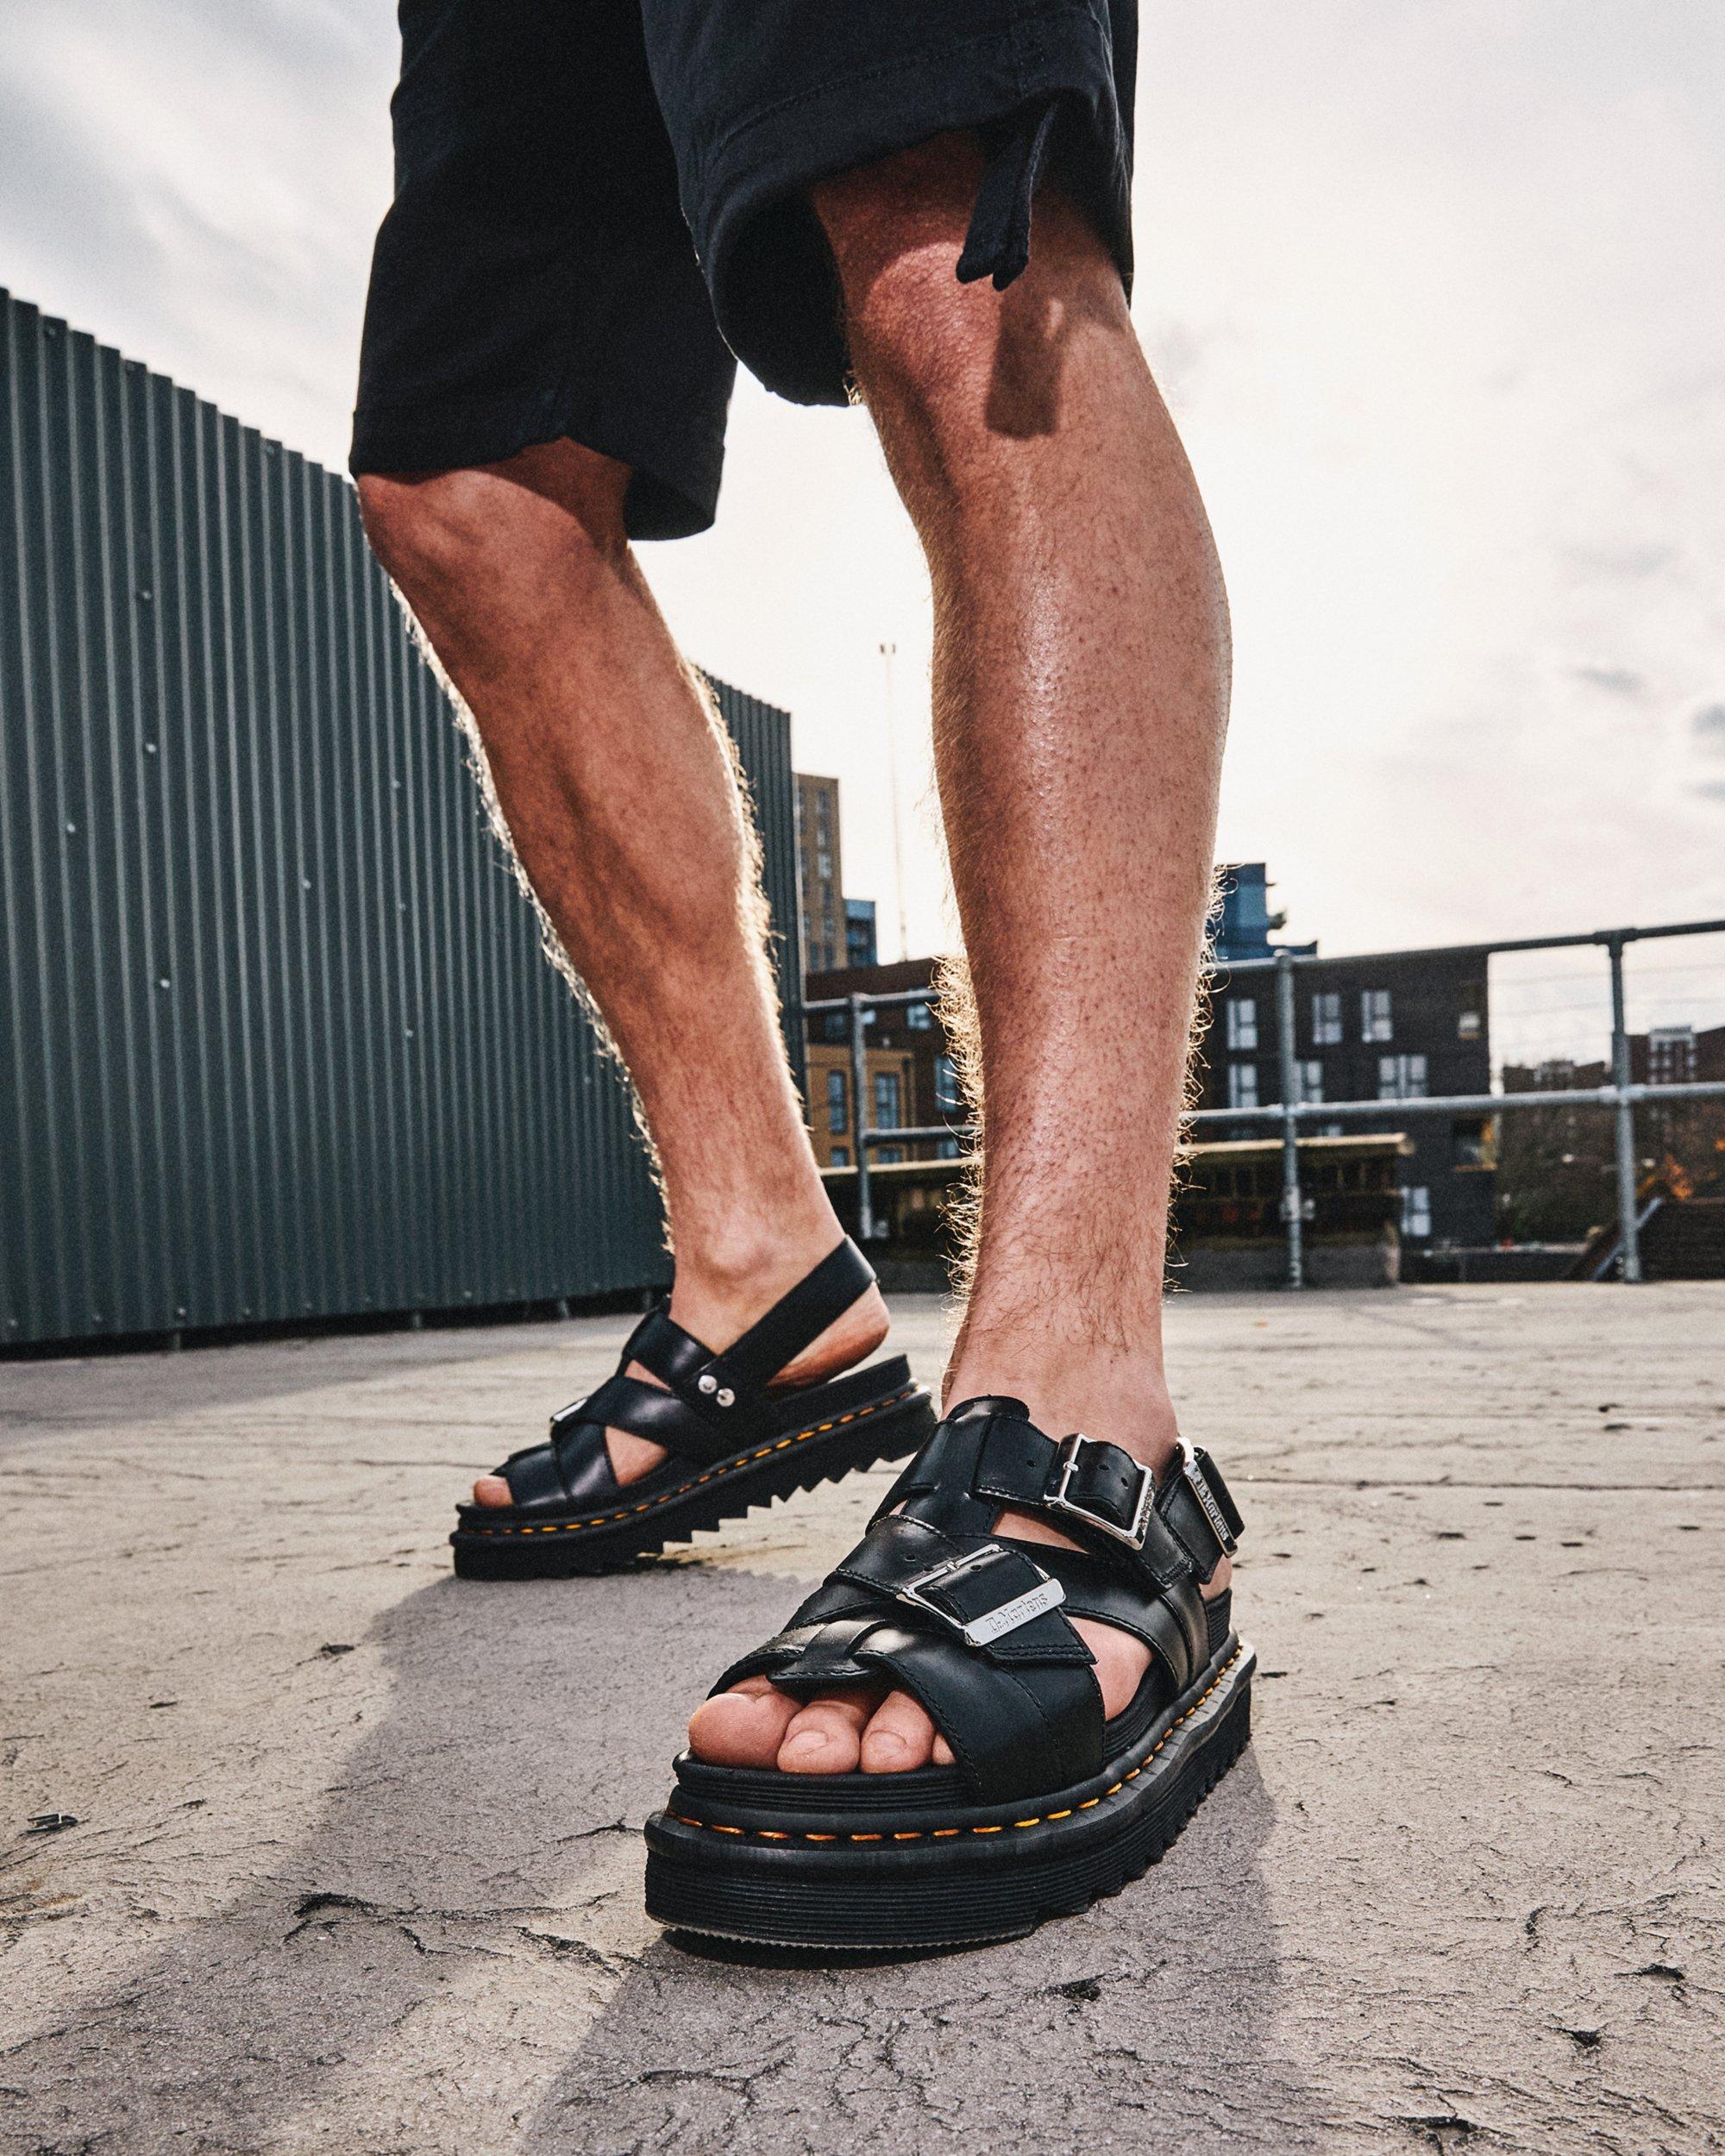 Terry II Leather Strap Sandals | Dr. Martens